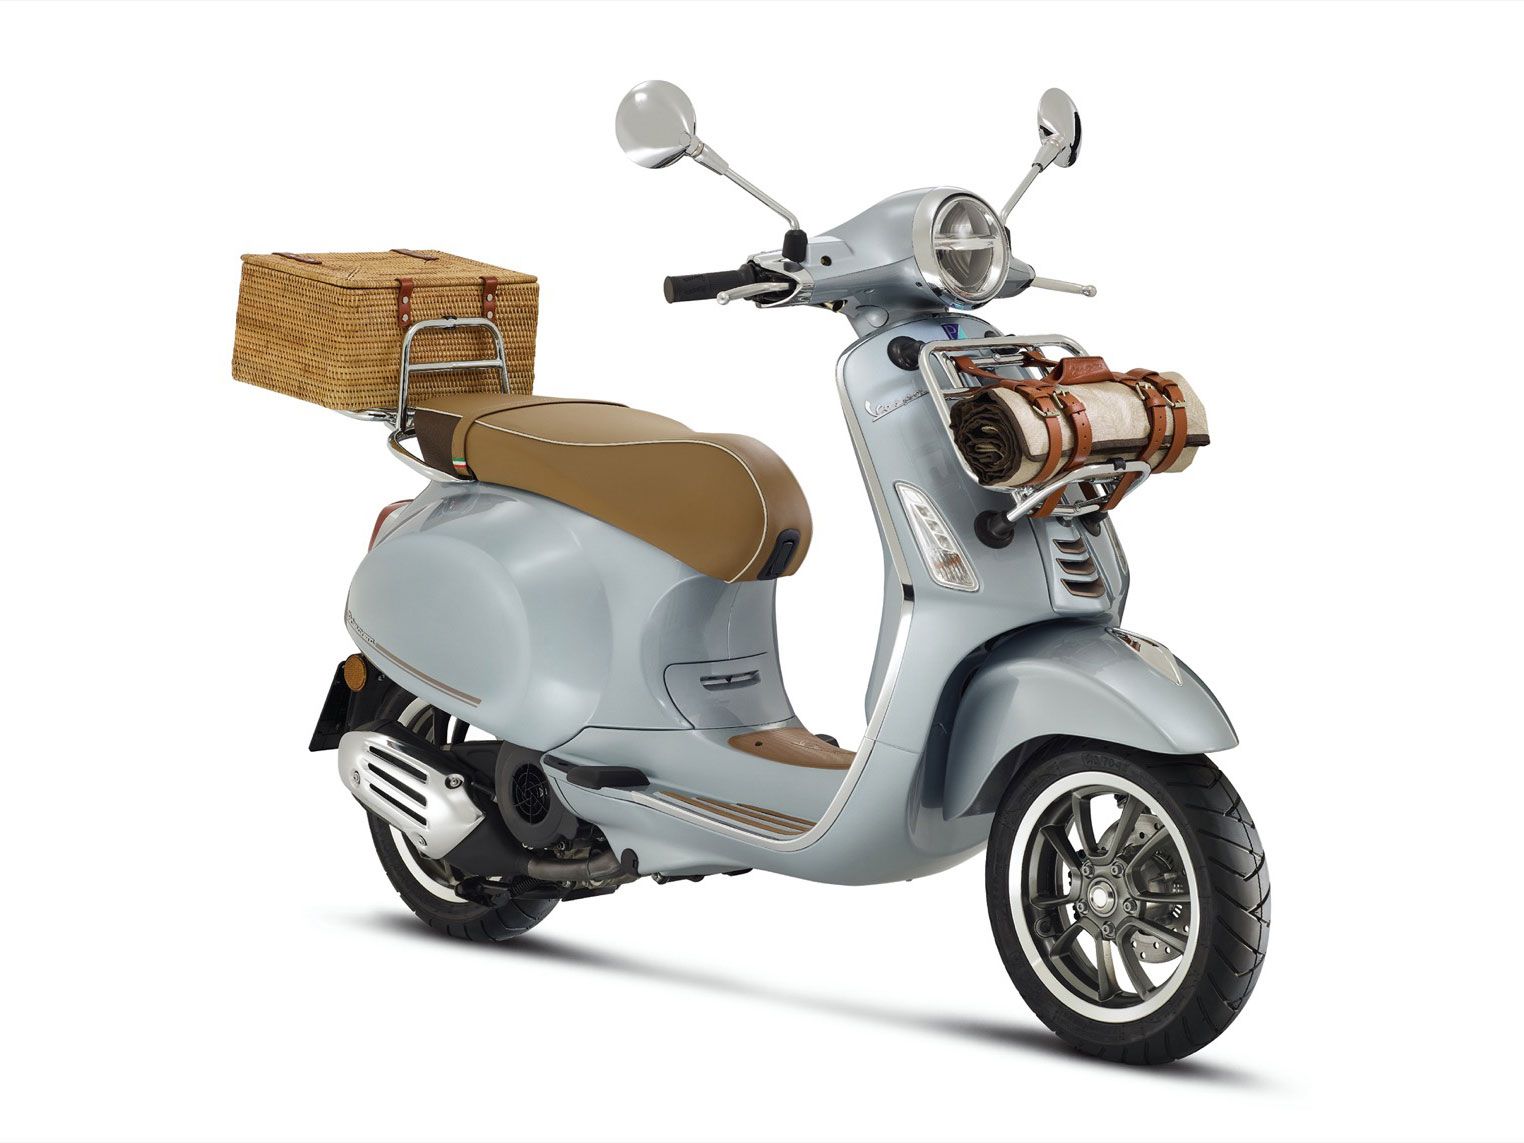 Picnic-outing ready. The 2023 Vespa Primavera Pic Nic edition is coming to the US in August.